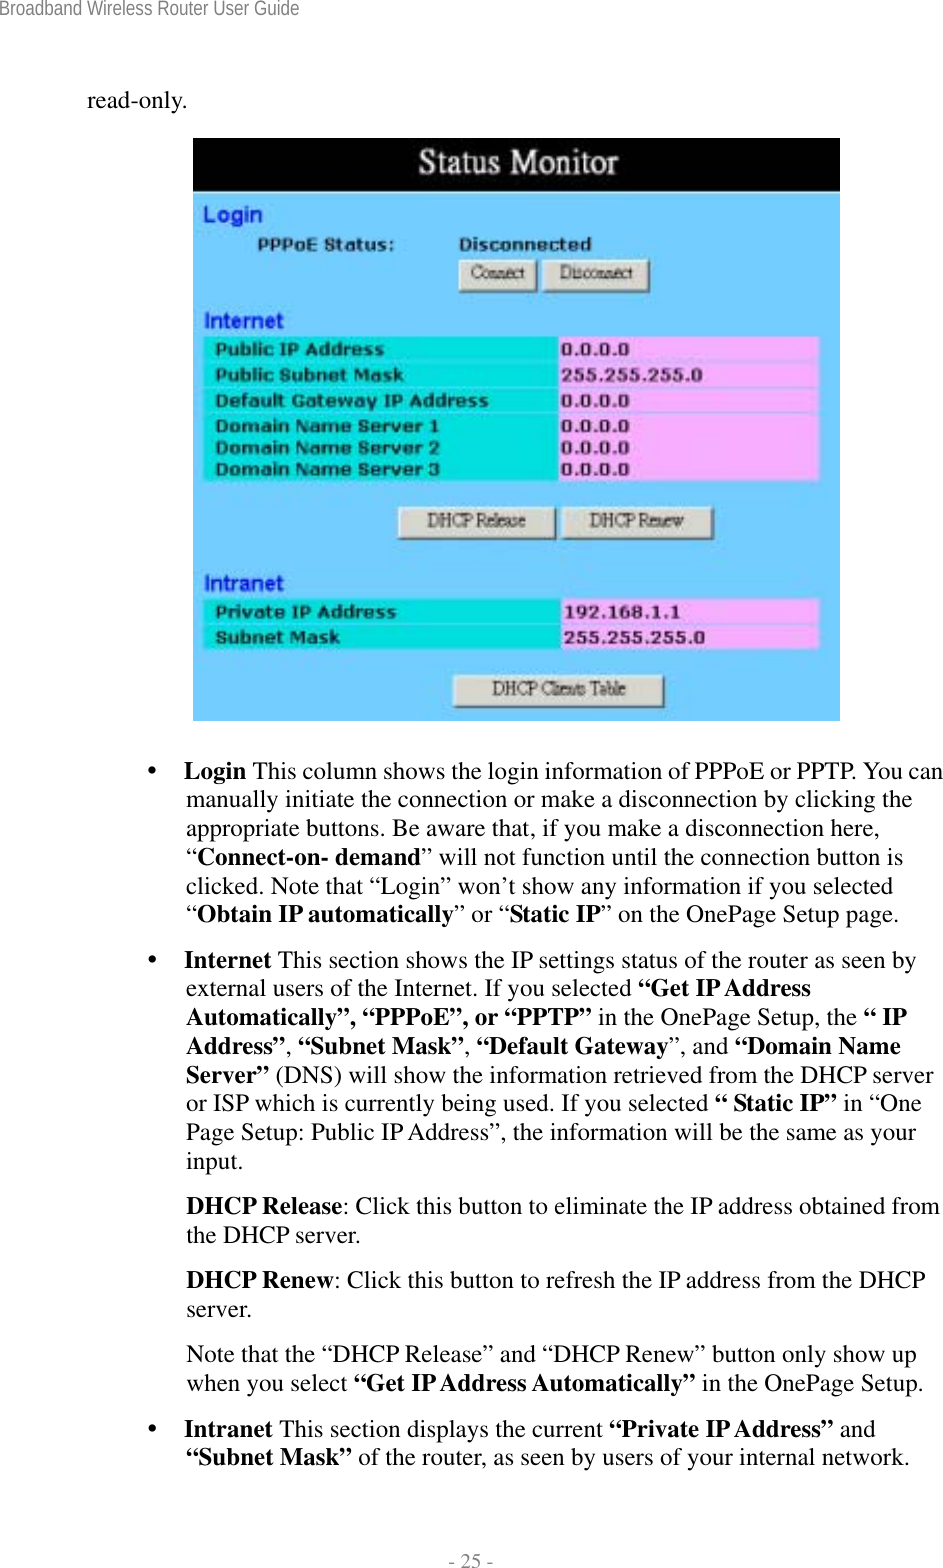 Broadband Wireless Router User Guide  - 25 - read-only.    Login This column shows the login information of PPPoE or PPTP. You can manually initiate the connection or make a disconnection by clicking the appropriate buttons. Be aware that, if you make a disconnection here, “Connect-on- demand” will not function until the connection button is clicked. Note that “Login” won’t show any information if you selected “Obtain IP automatically” or “Static IP” on the OnePage Setup page.  Internet This section shows the IP settings status of the router as seen by external users of the Internet. If you selected “Get IP Address Automatically”, “PPPoE”, or “PPTP” in the OnePage Setup, the “ IP Address”, “Subnet Mask”, “Default Gateway”, and “Domain Name Server” (DNS) will show the information retrieved from the DHCP server or ISP which is currently being used. If you selected “ Static IP” in “One Page Setup: Public IP Address”, the information will be the same as your input. DHCP Release: Click this button to eliminate the IP address obtained from the DHCP server. DHCP Renew: Click this button to refresh the IP address from the DHCP server. Note that the “DHCP Release” and “DHCP Renew” button only show up when you select “Get IP Address Automatically” in the OnePage Setup.  Intranet This section displays the current “Private IP Address” and “Subnet Mask” of the router, as seen by users of your internal network. 